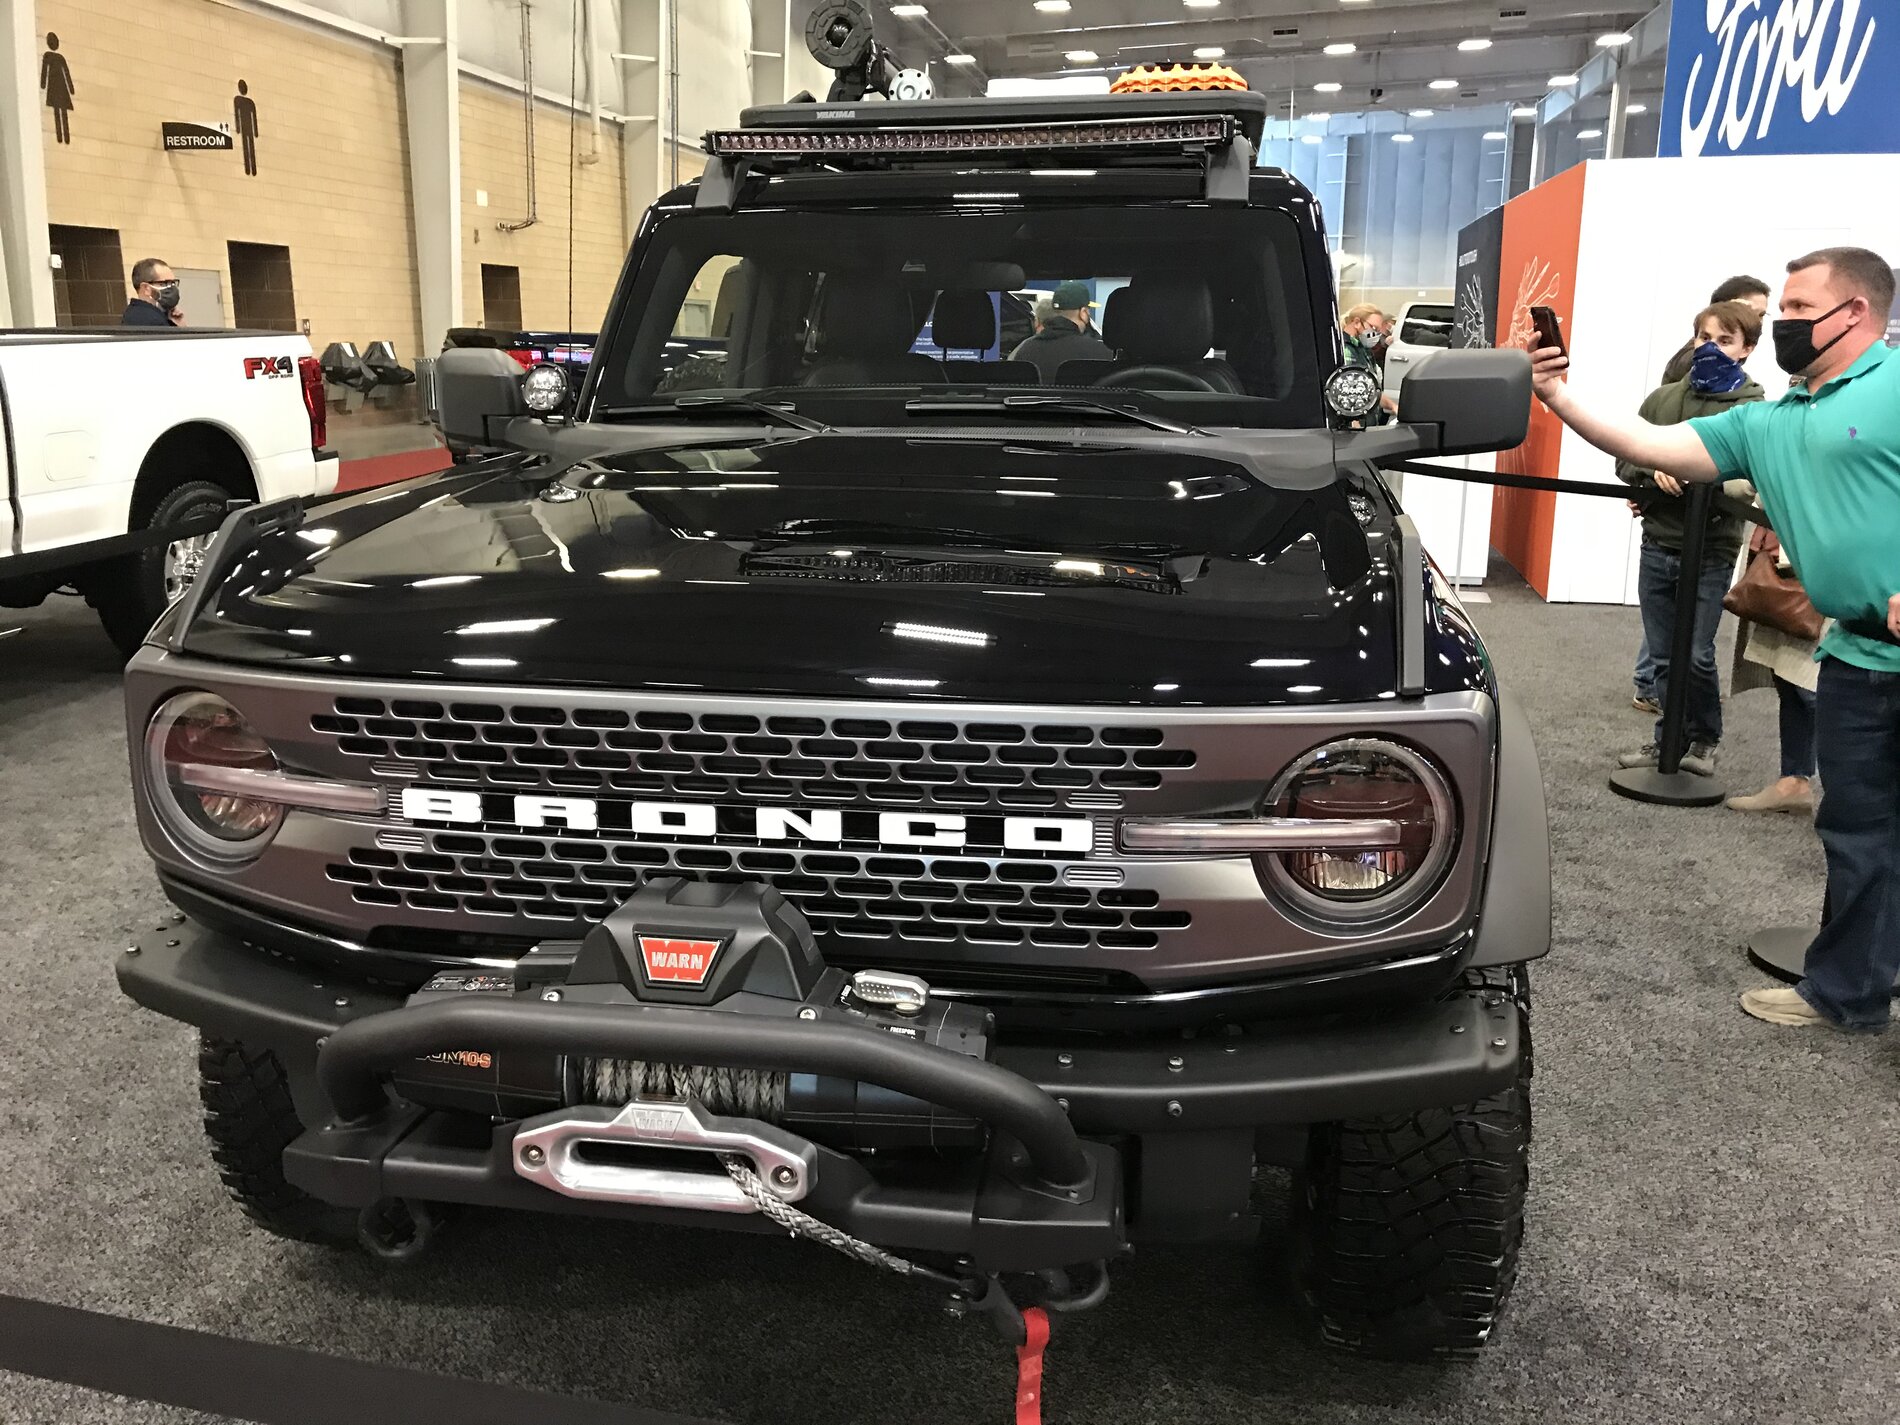 Ford Bronco Pics & Videos From OKC Show: 2-Door Trail Concept and Overland Concept Broncos 817B0EB9-353D-4158-8055-3AE759CA89FF